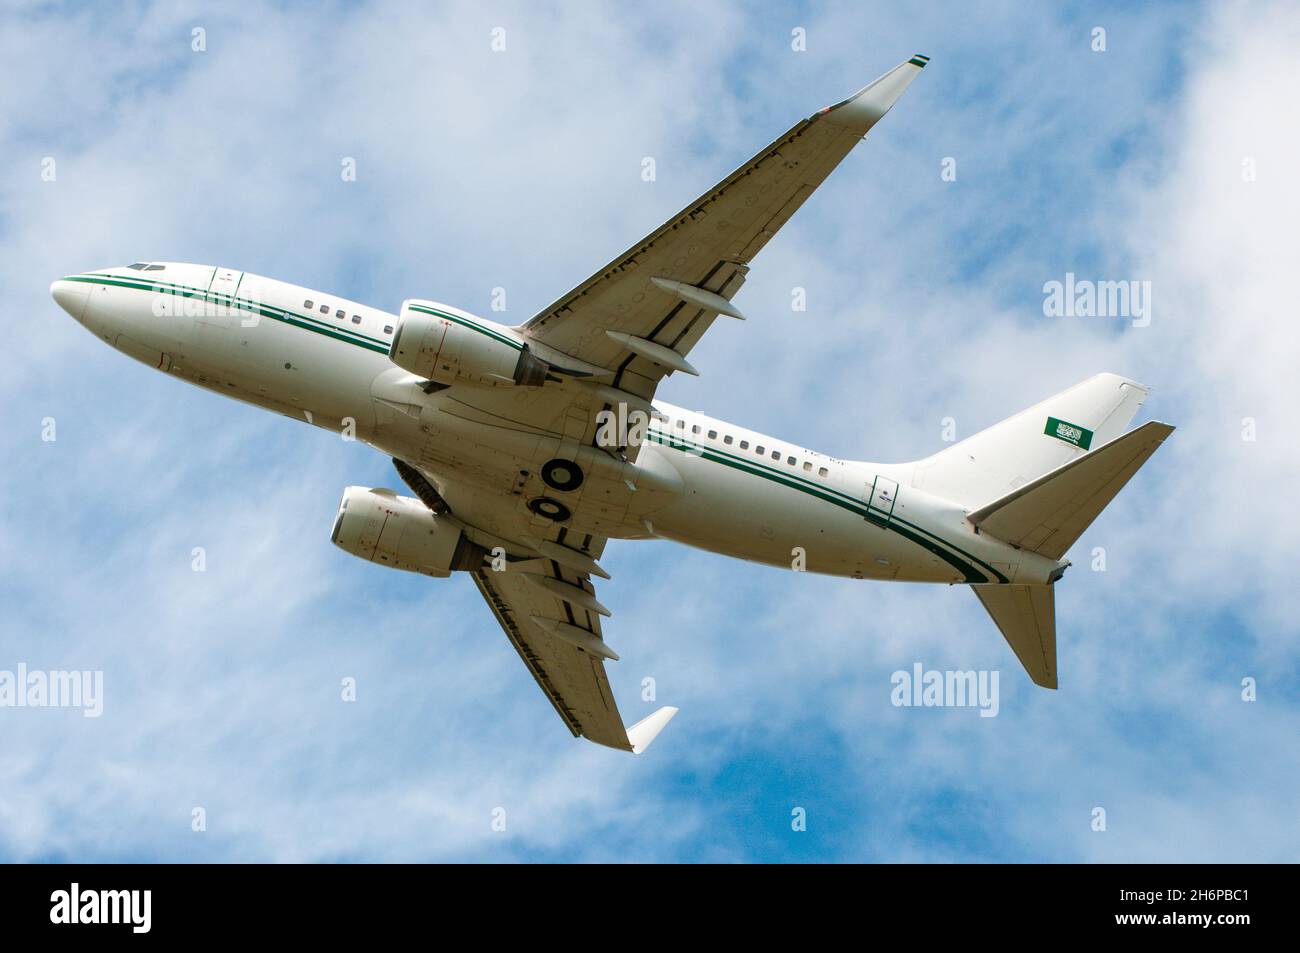 Royal Saudi Air Force Boeing 737 BBJ airliner jet plane HZ-101 taking off from Farnborough Airport, Hampshire, UK. Boeing Business Jet, VIP transport Stock Photo